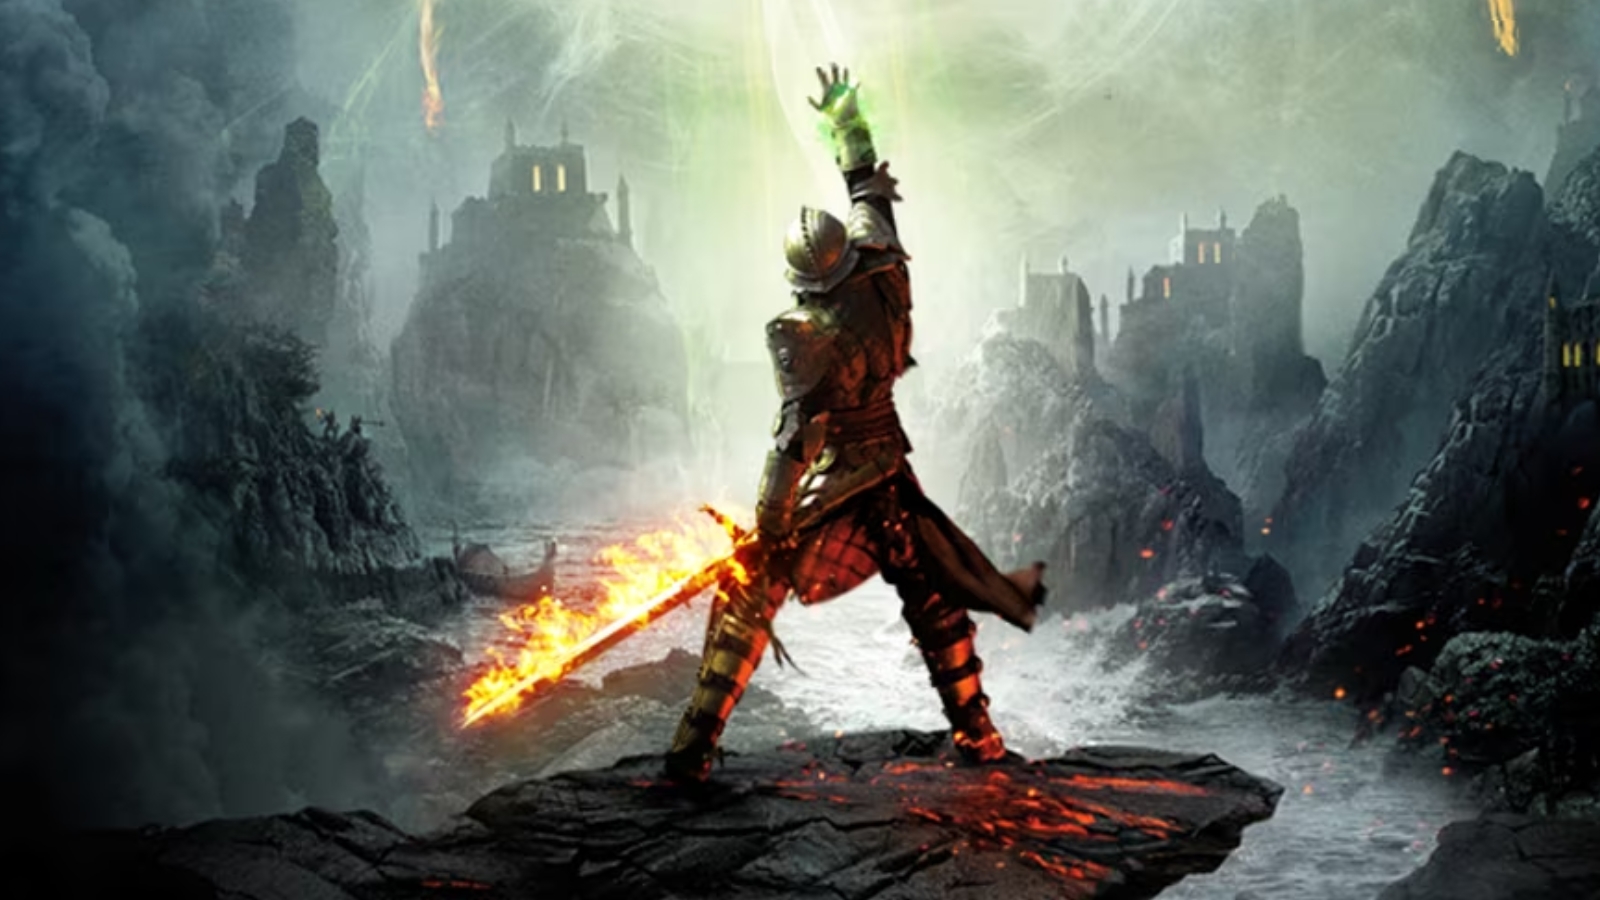 Dragon Age Inquisition: Champions Of The Just Quest Walkthrough